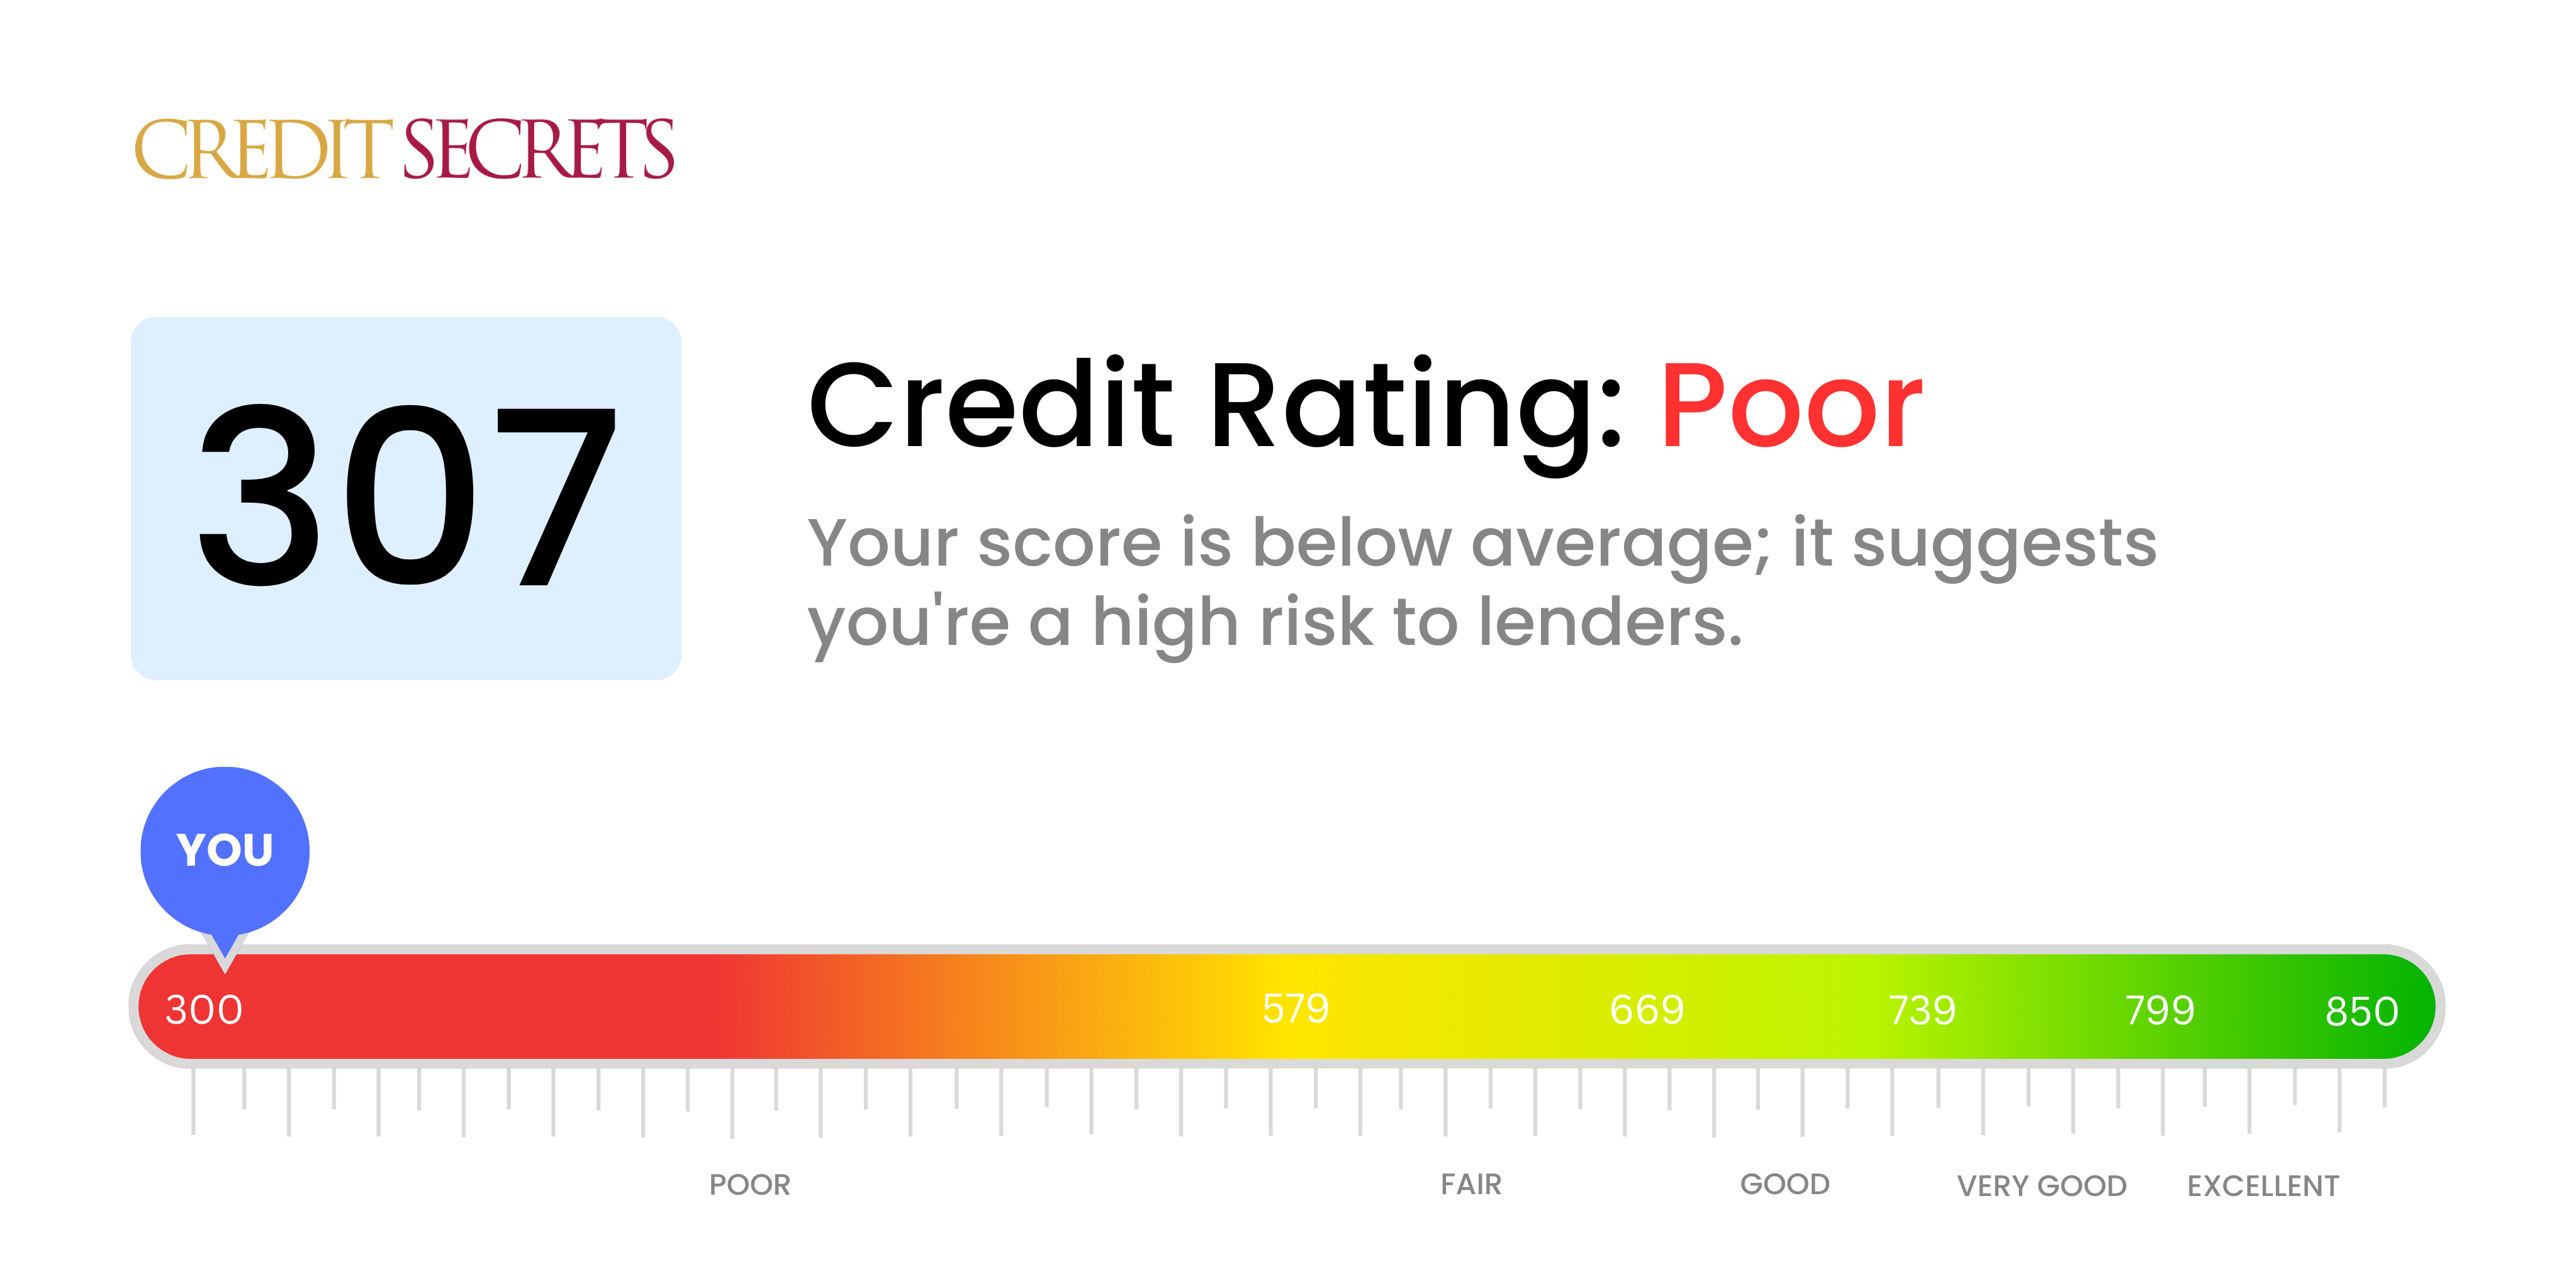 Is 307 a good credit score?